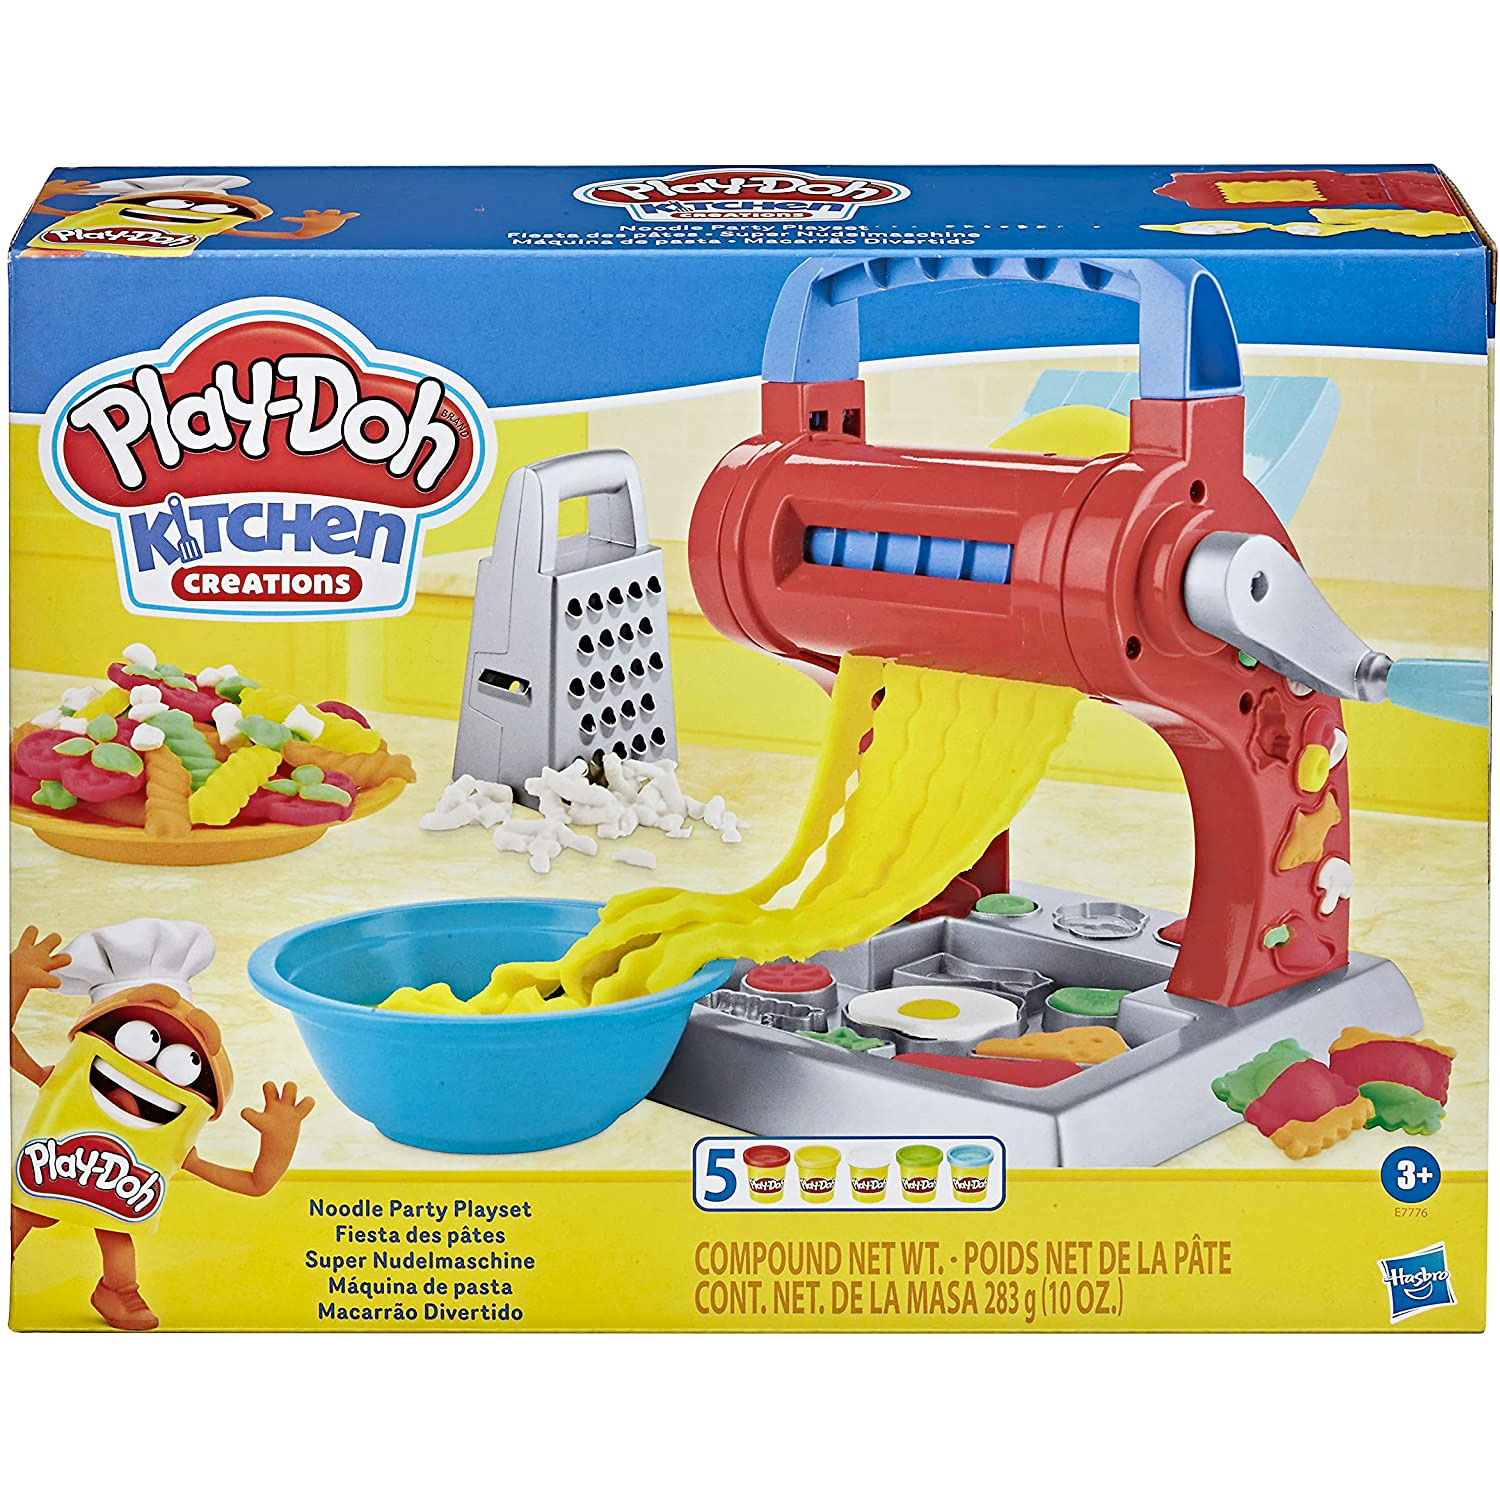 Amazon：Play-Doh Kitchen Creations Noodle Party Playset with 5 Non-Toxic Play-Doh Colors只卖$9